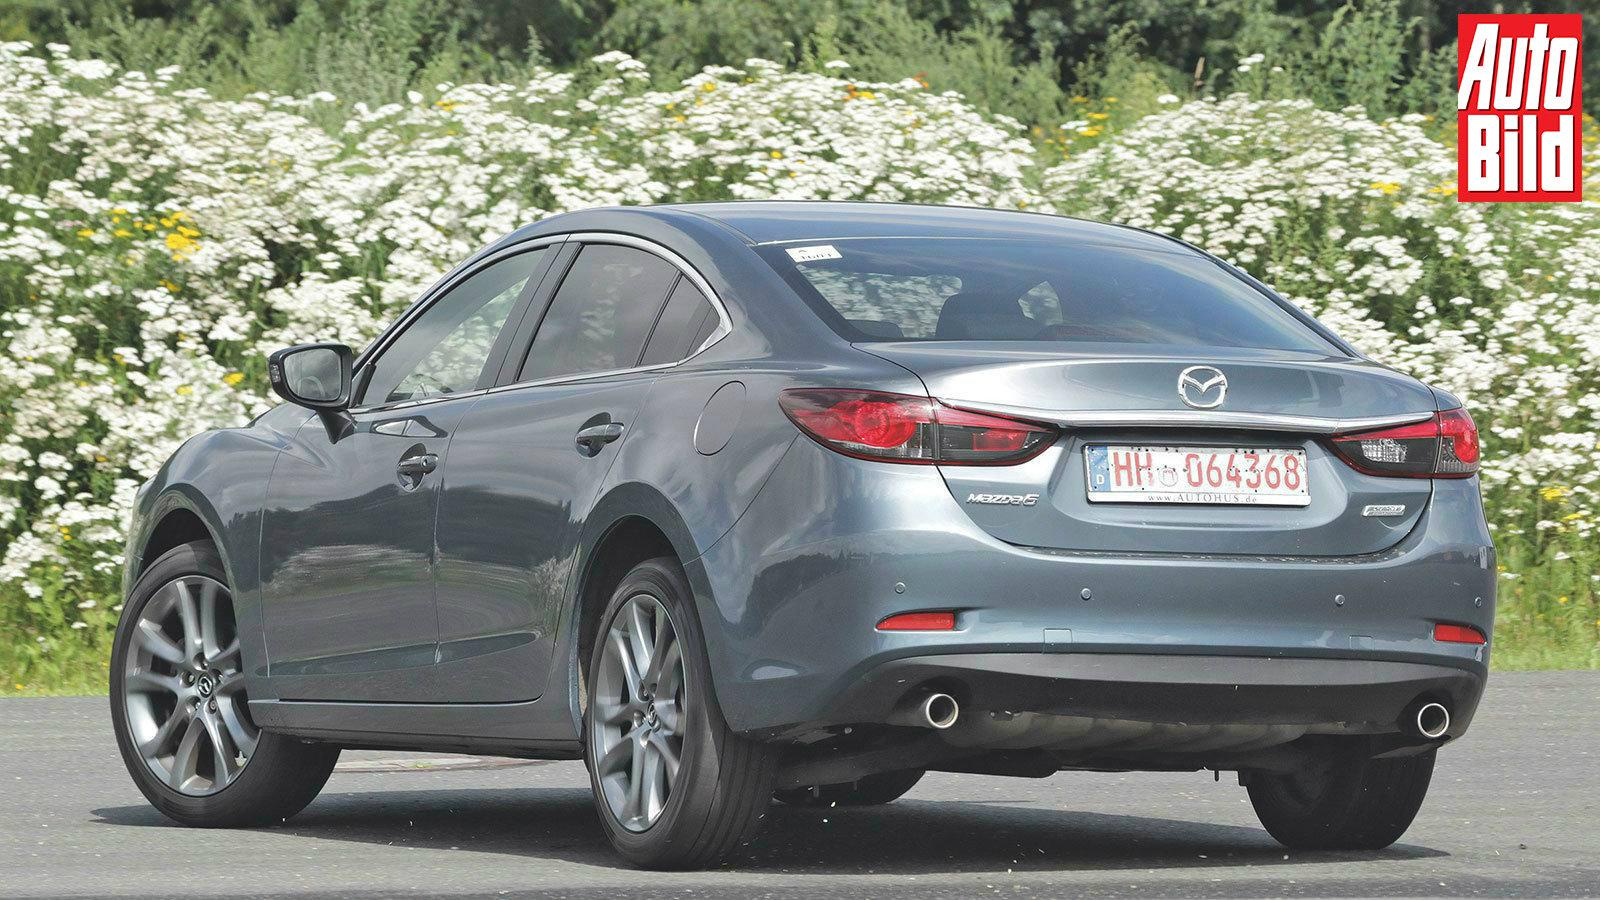 Review Μεταχειρισμένου: Mazda 6